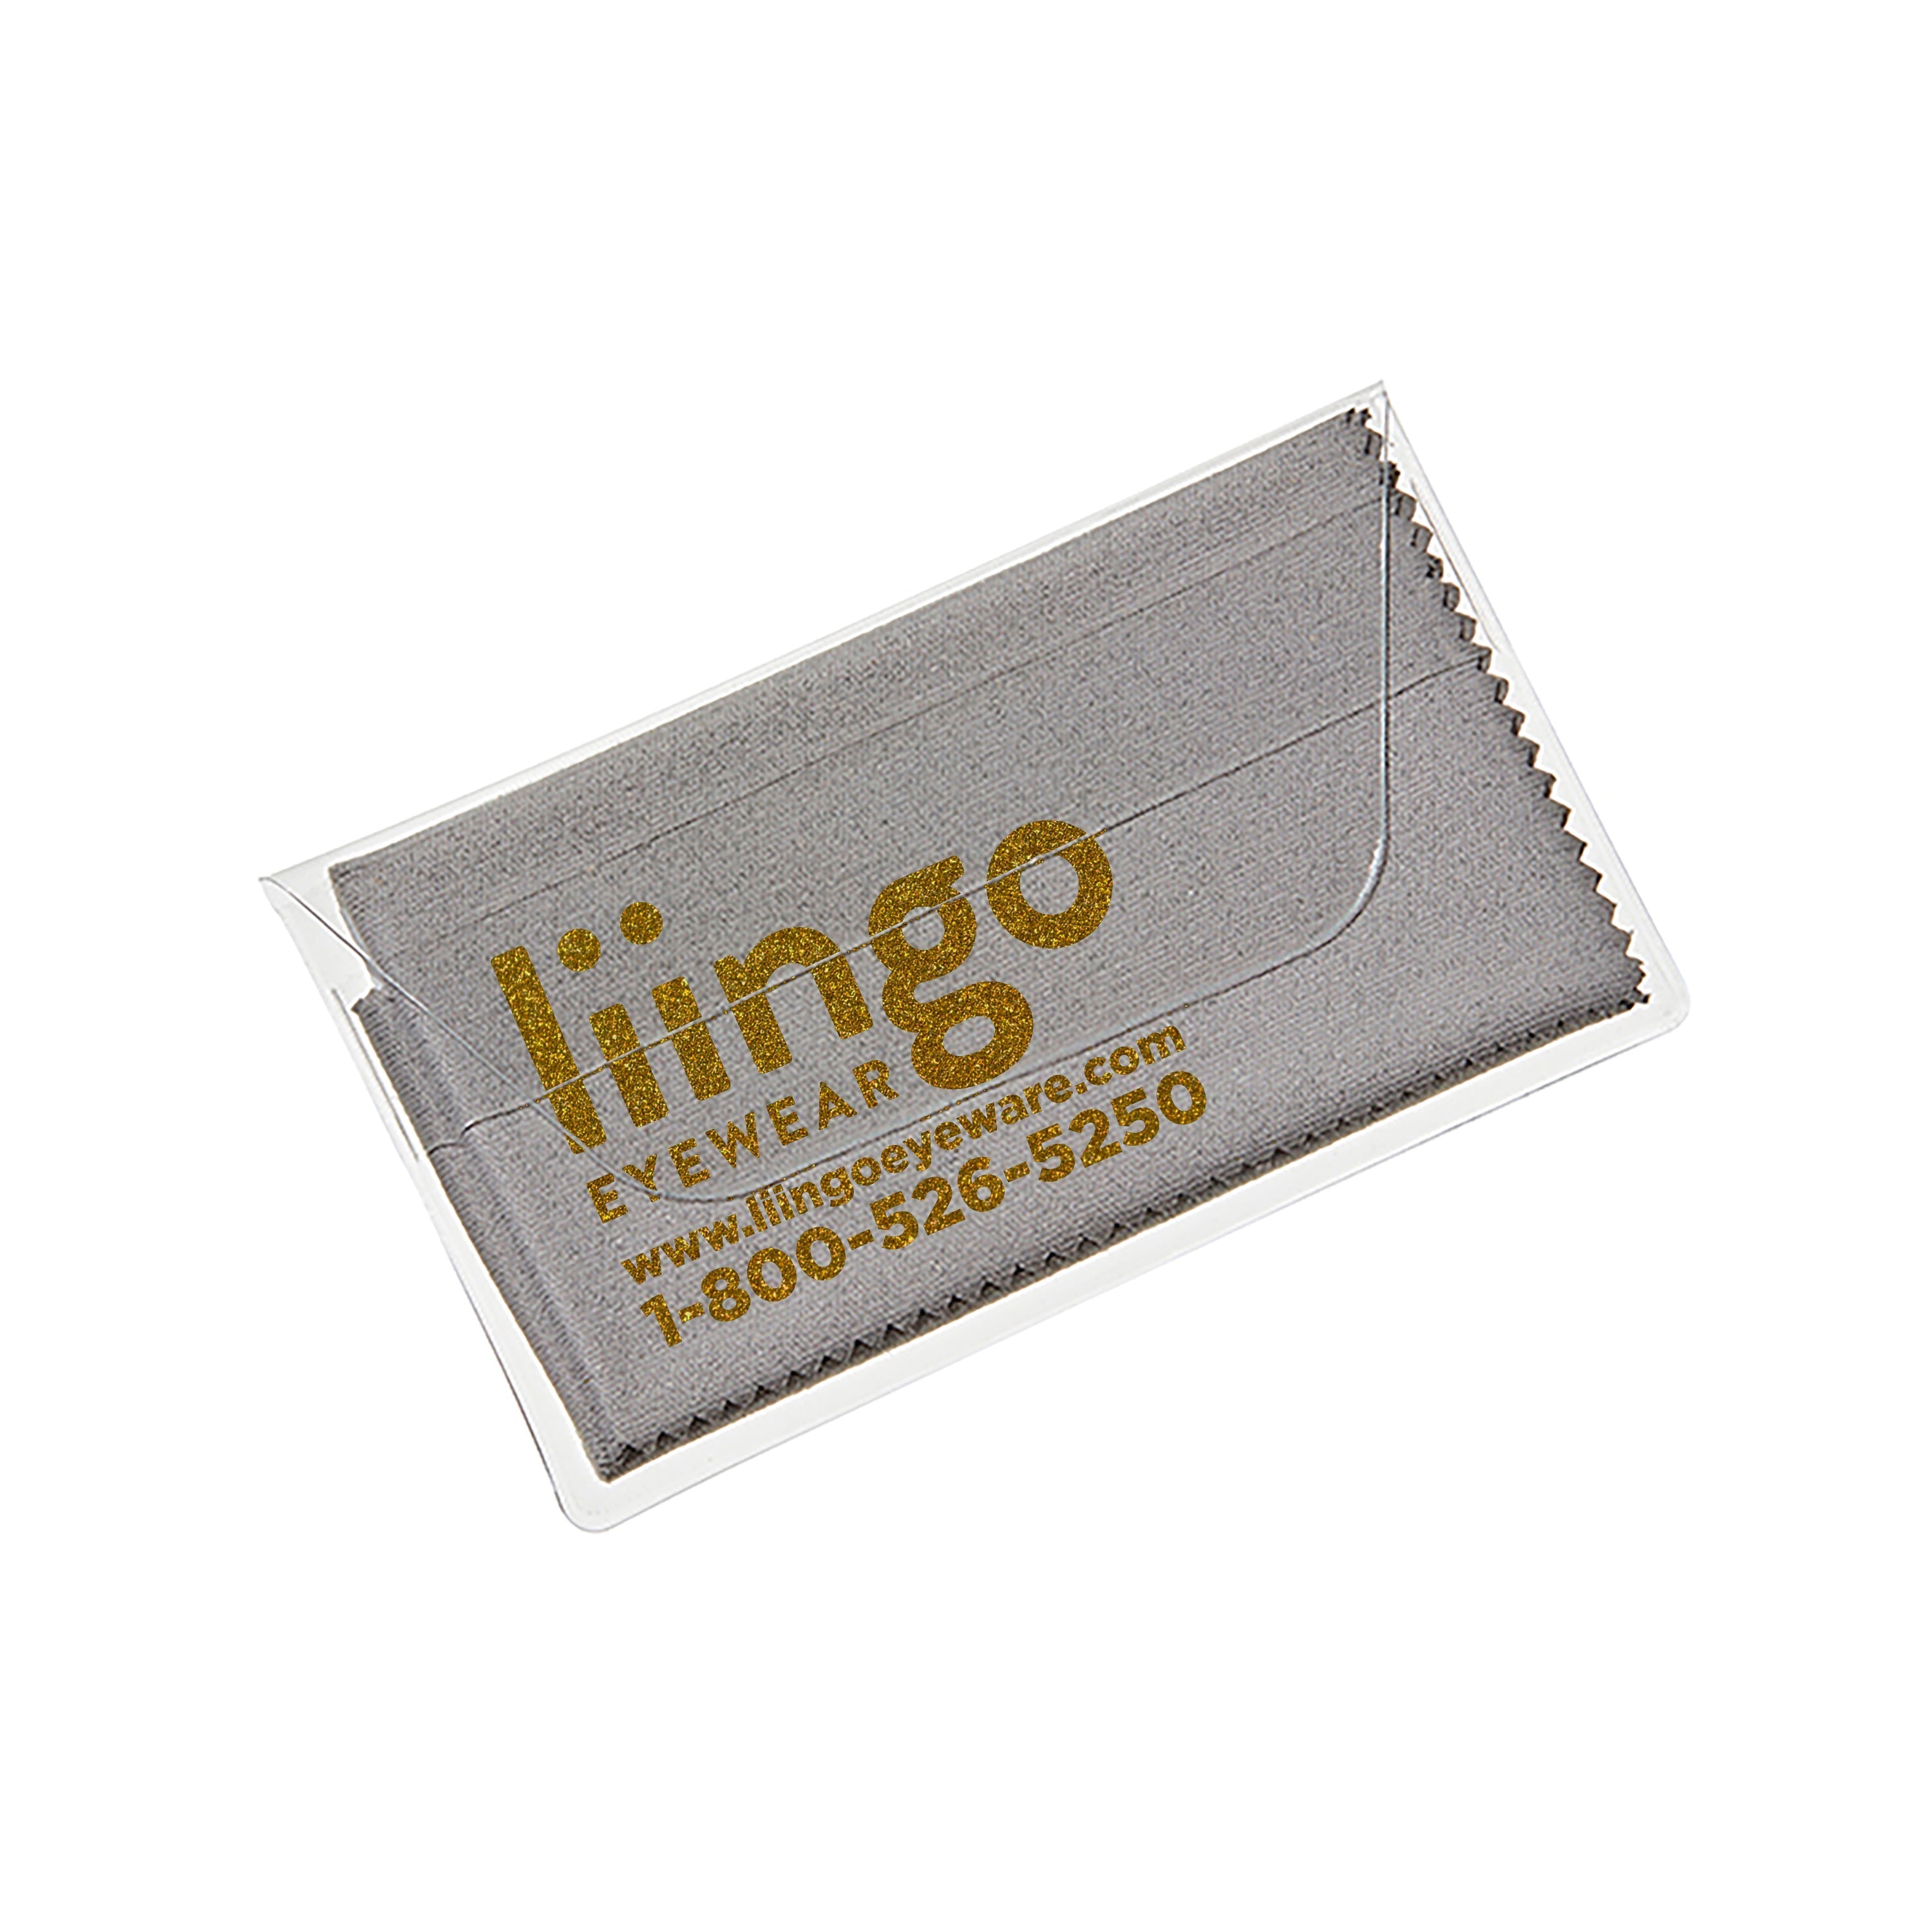 Purity™ Imprinted Microfiber Cloth in Clear Pouch (Metallic Ink)